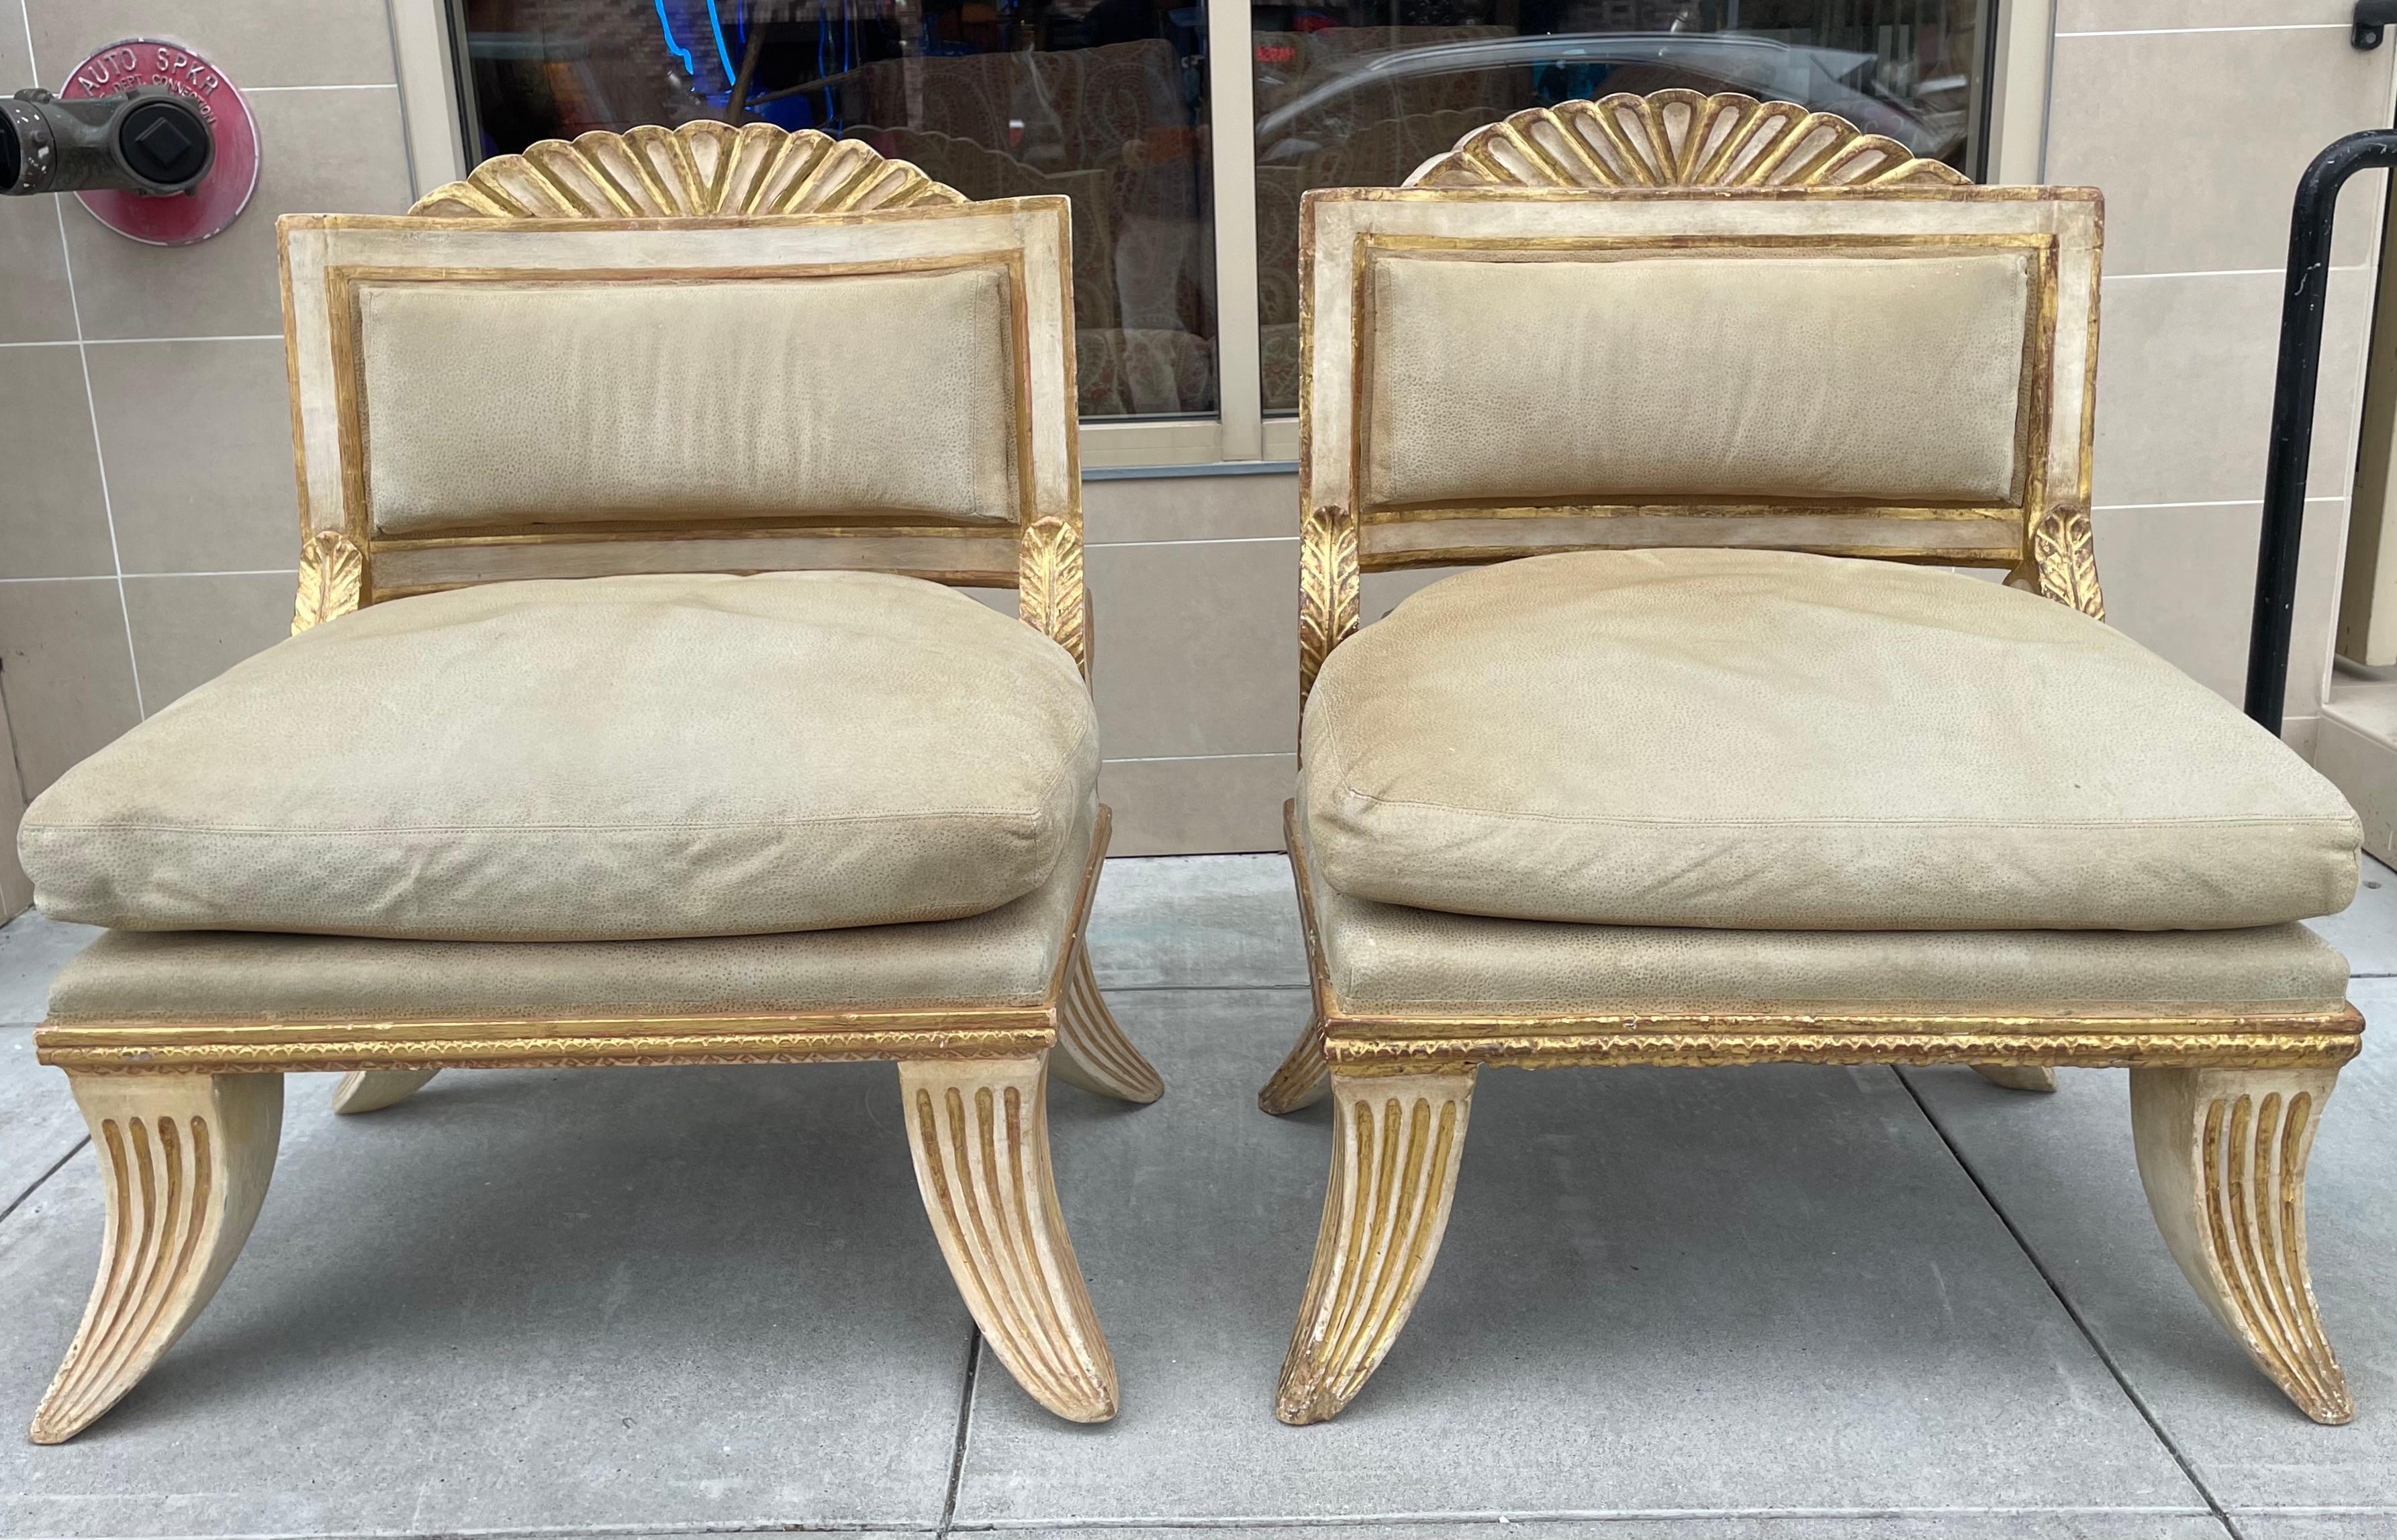 This generously scaled pair of Swedish style chairs hail from a storied Seacliff mansion in San Francisco. They are covered in a luxurious suede and are extremely comfortable.